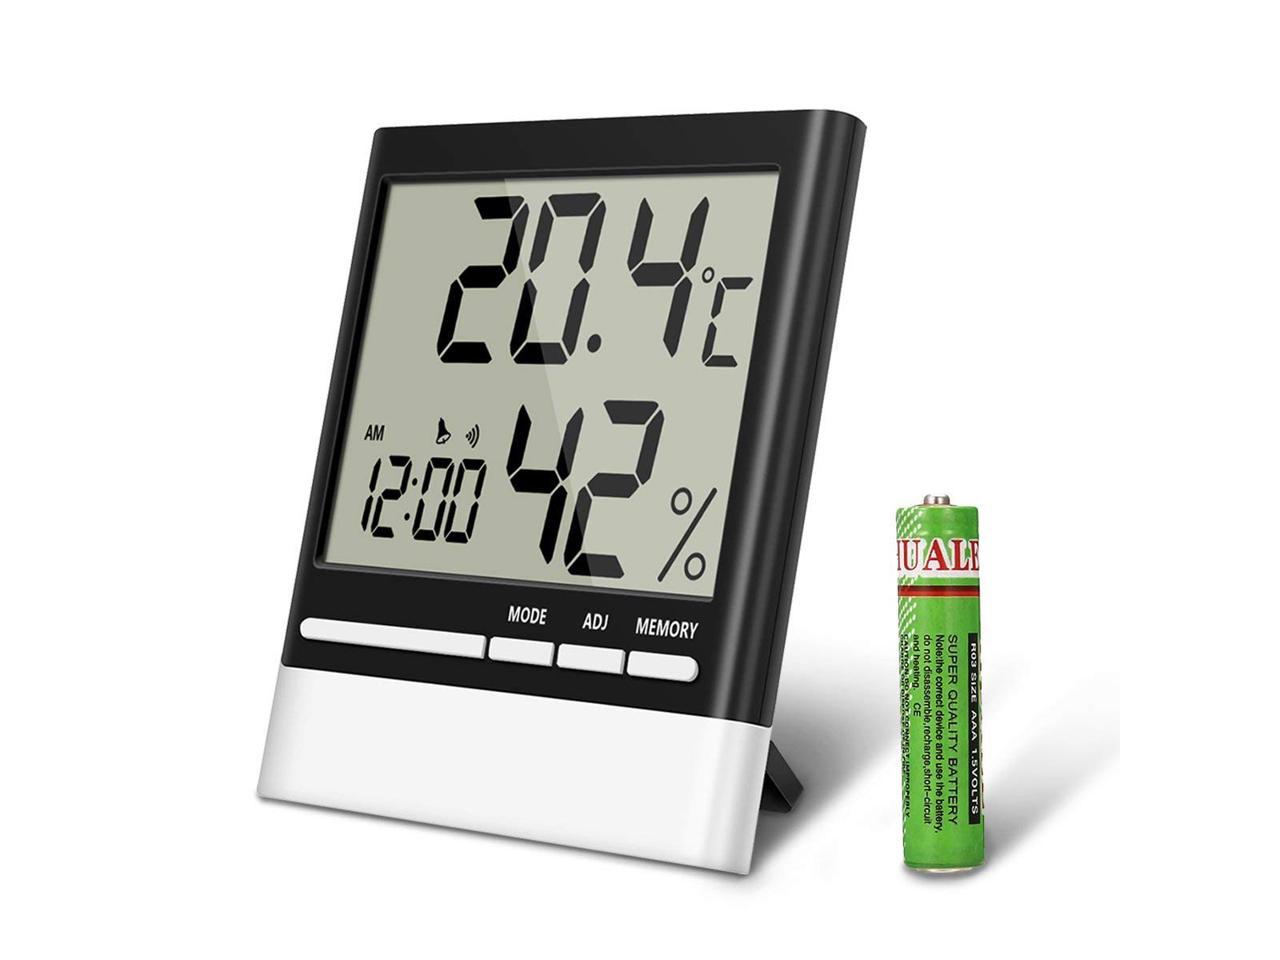 Weather Station Forecast Thermometer Humidity Clock Flashlight &Portable Compass 